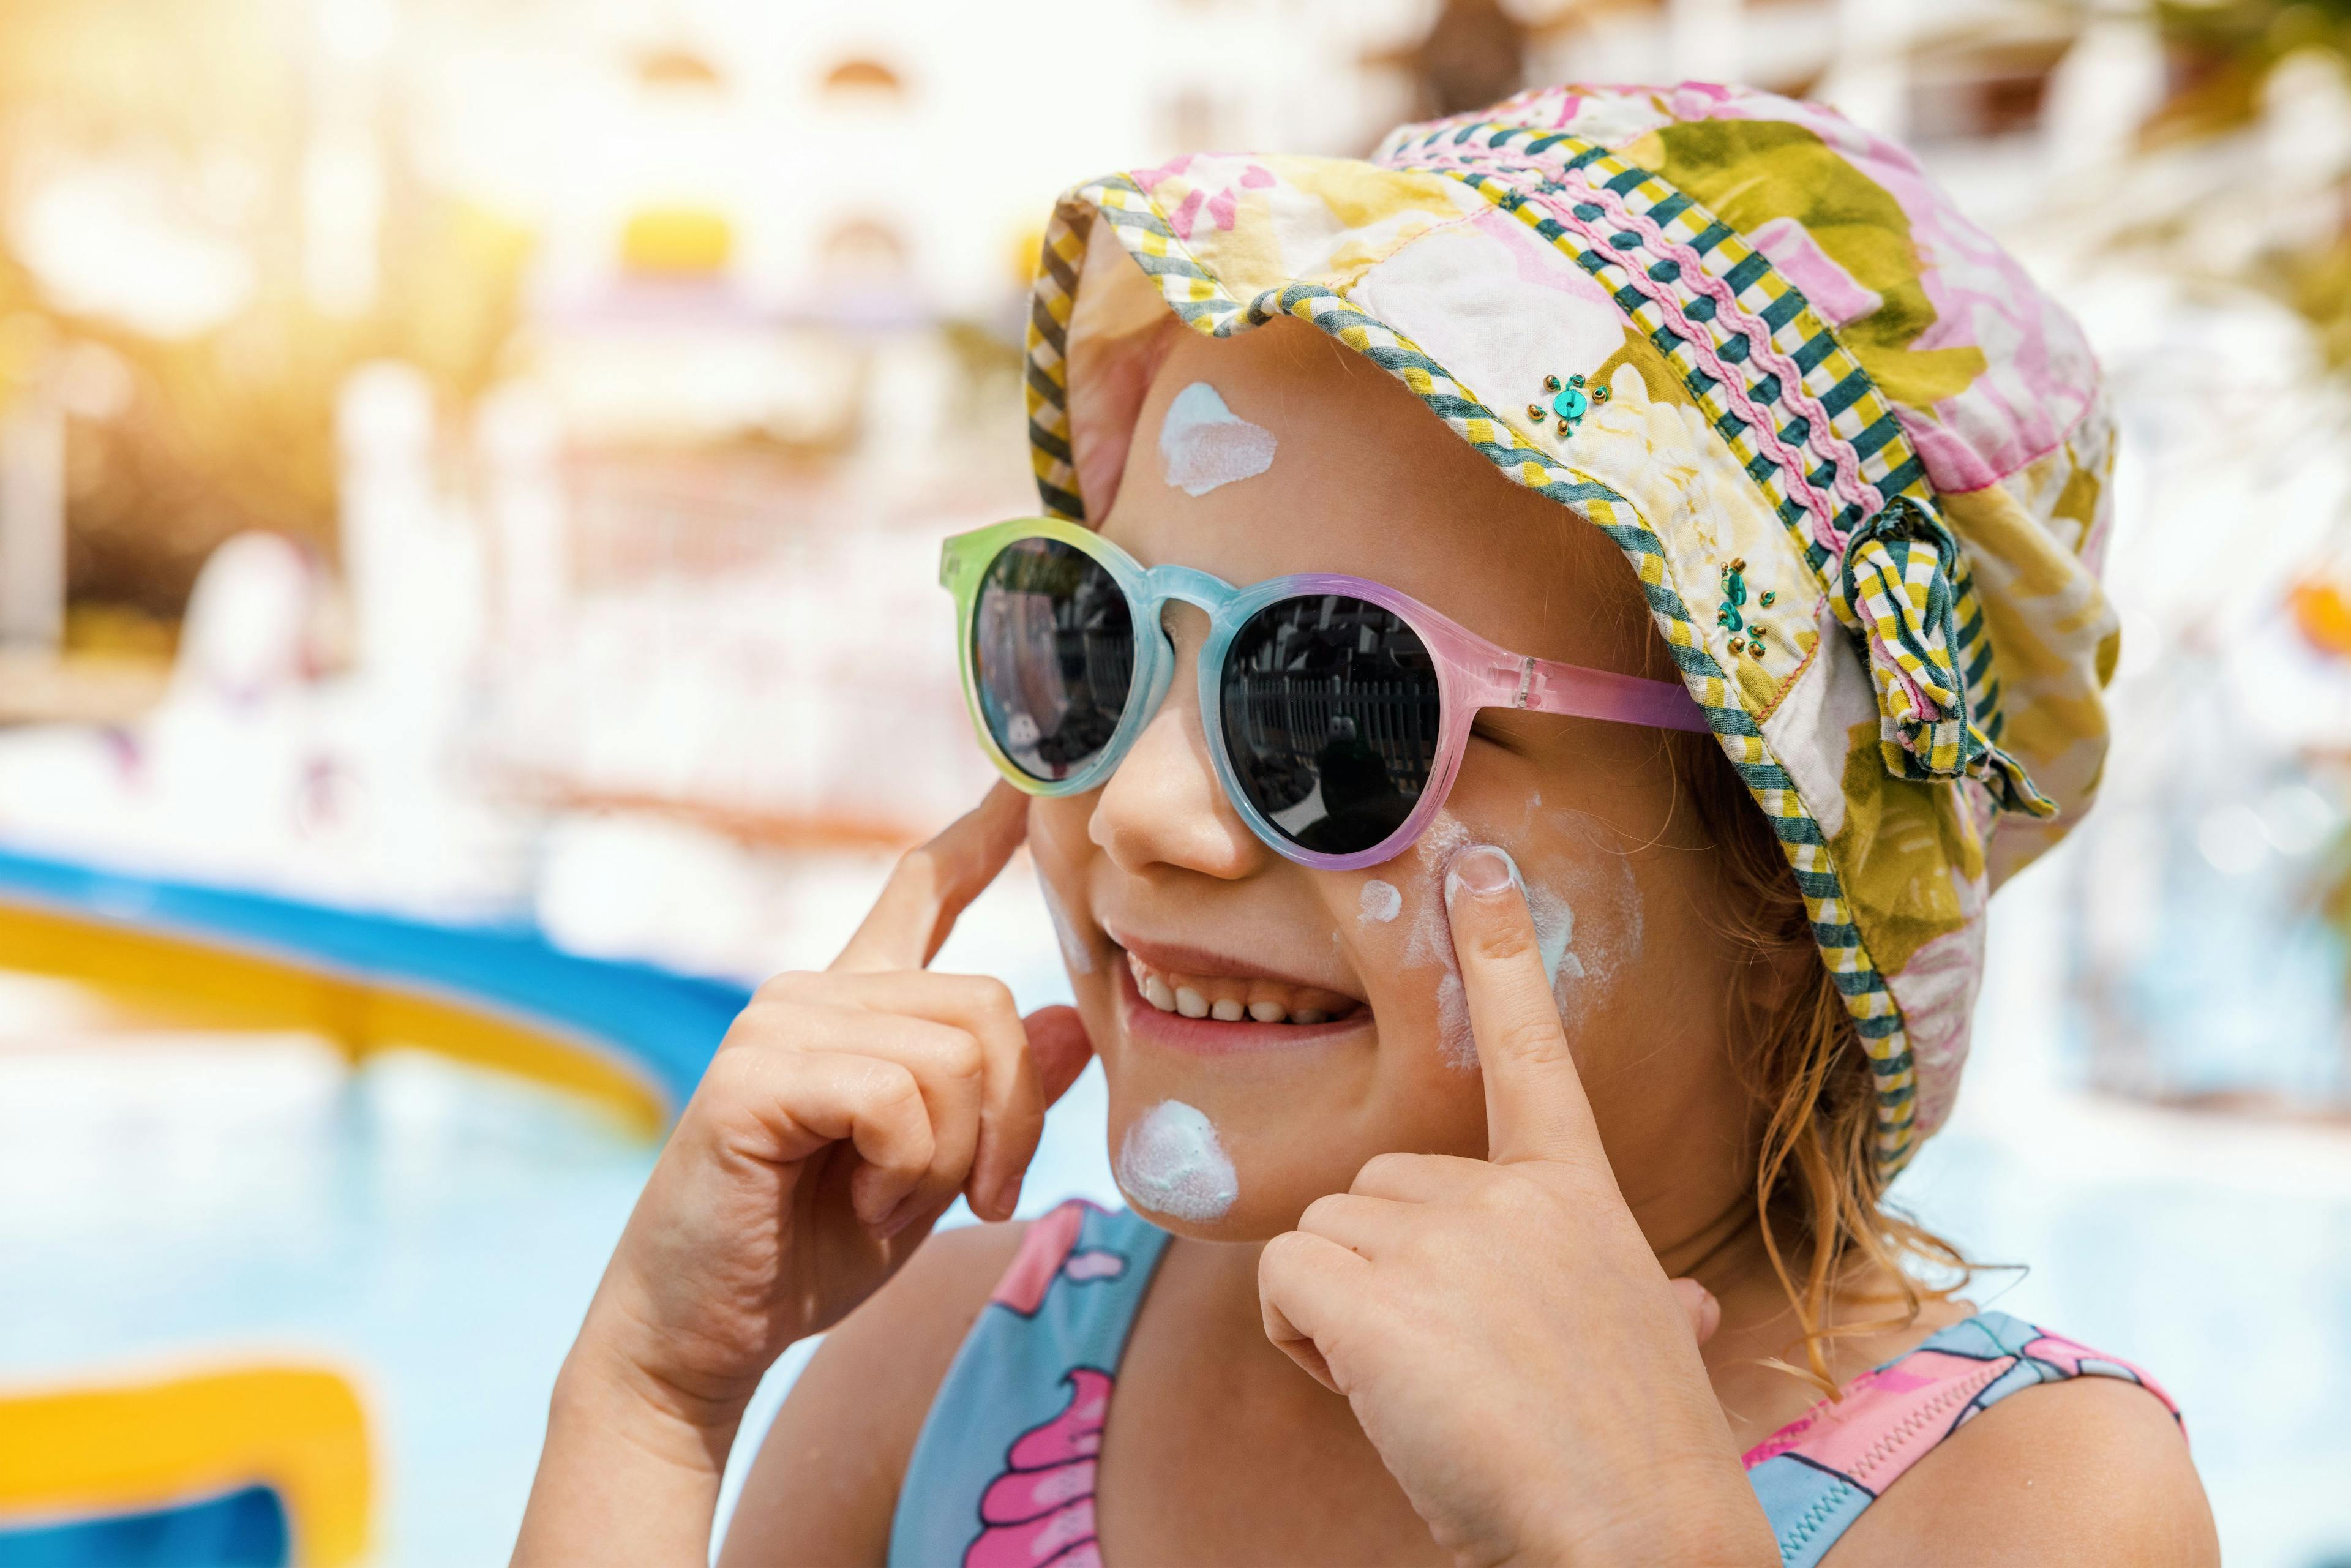 Recognizing and Managing Pediatric Skin Cancer With Early Detection and Education